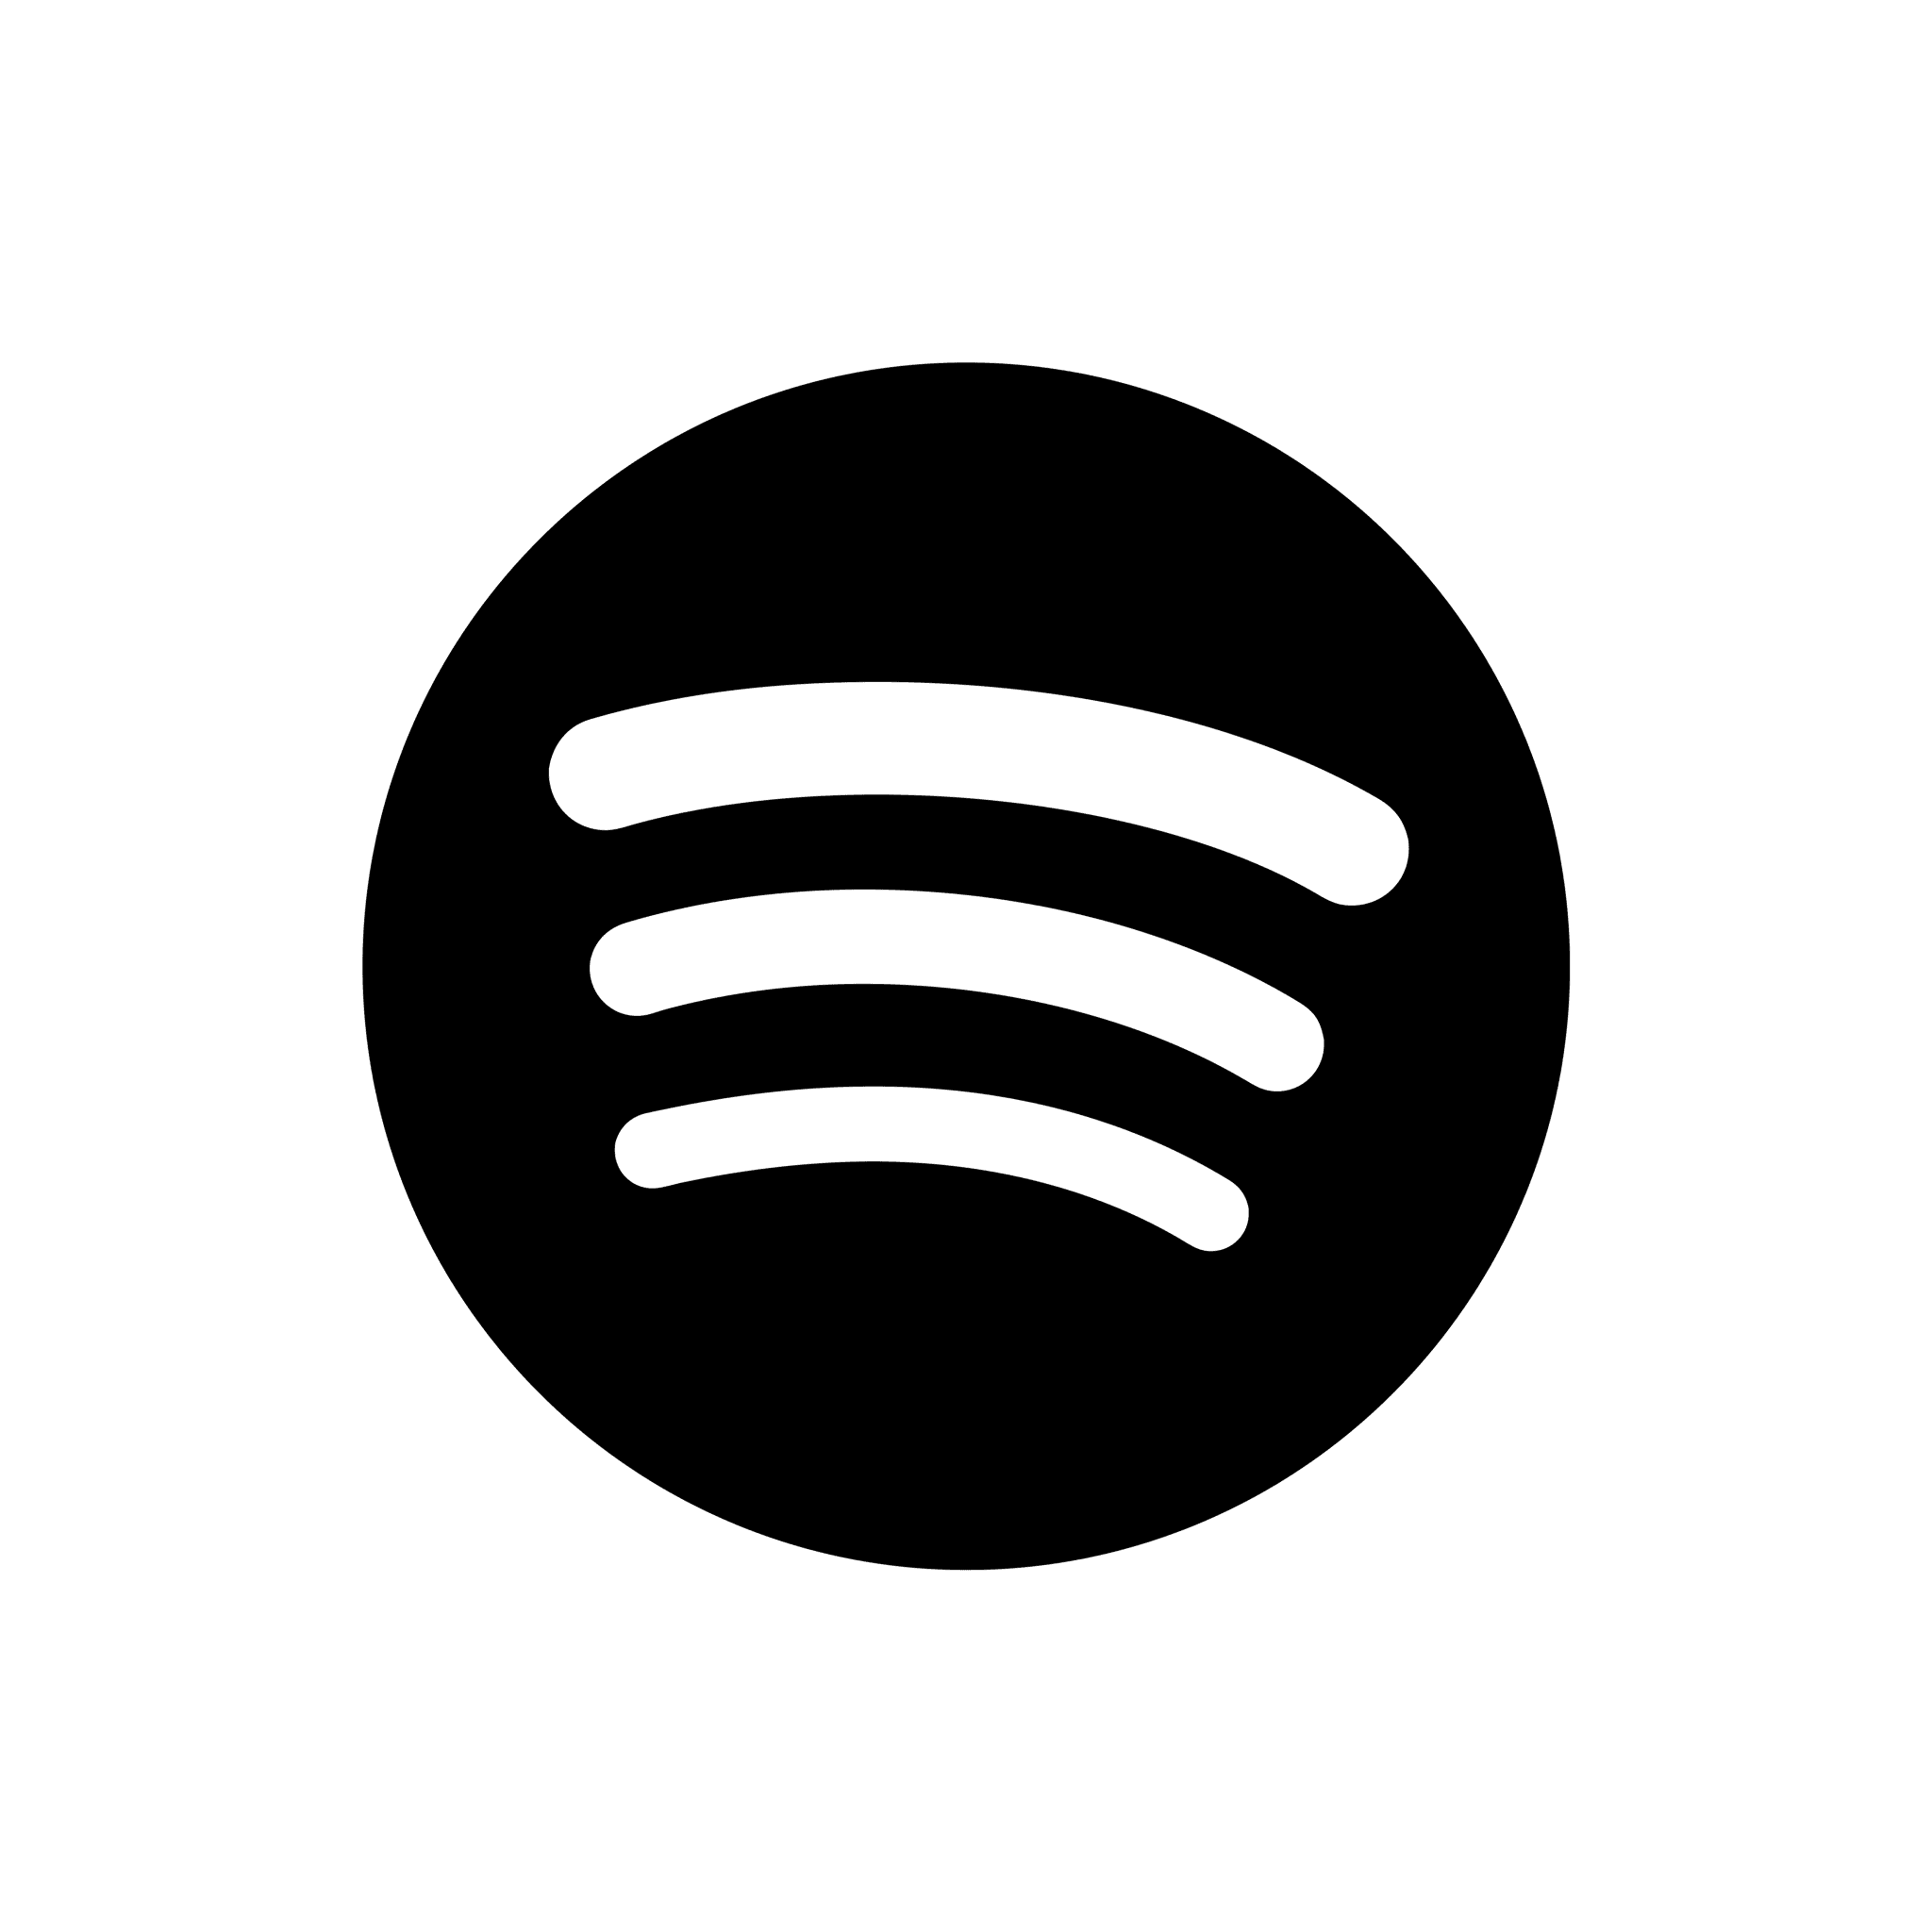 Spotify Logo and symbol, meaning, history, sign.